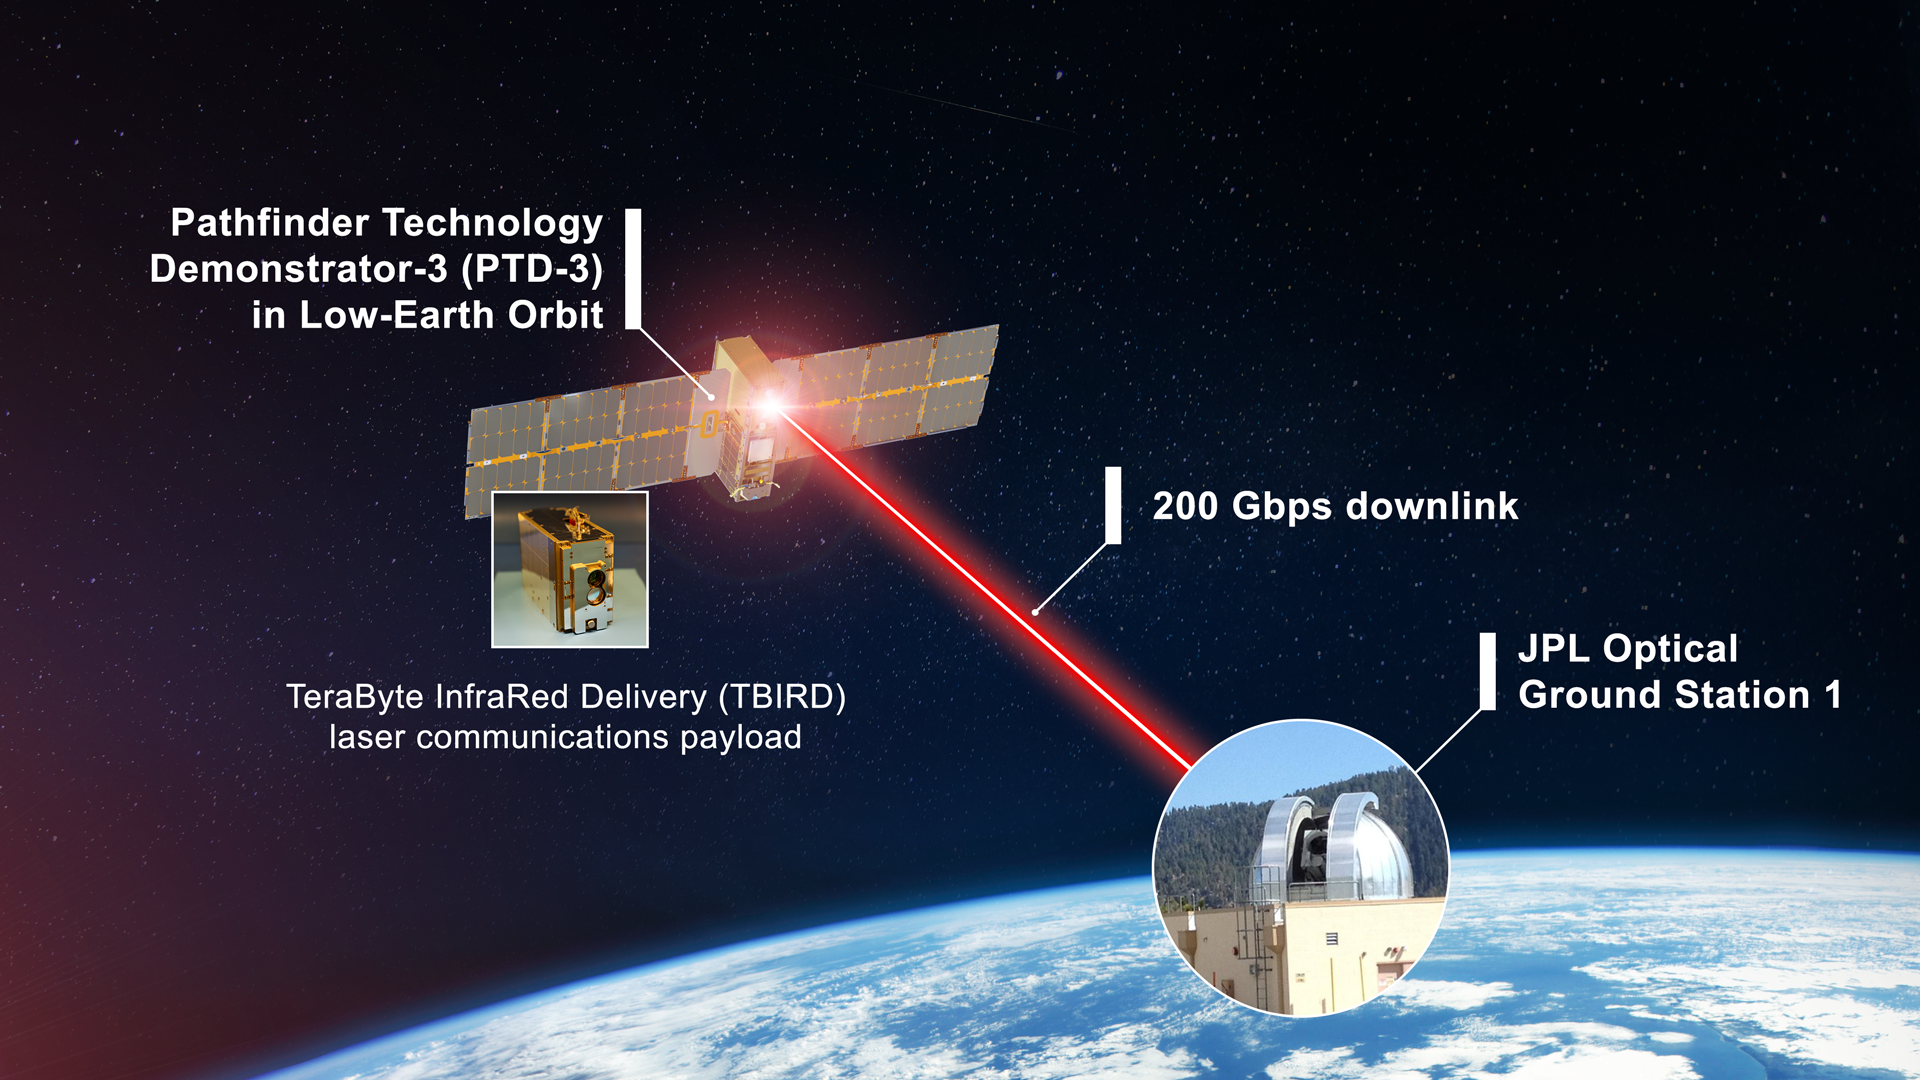 Illustration of TBIRD downlinking data over lasers links to Optical Ground Station 1 in California. 